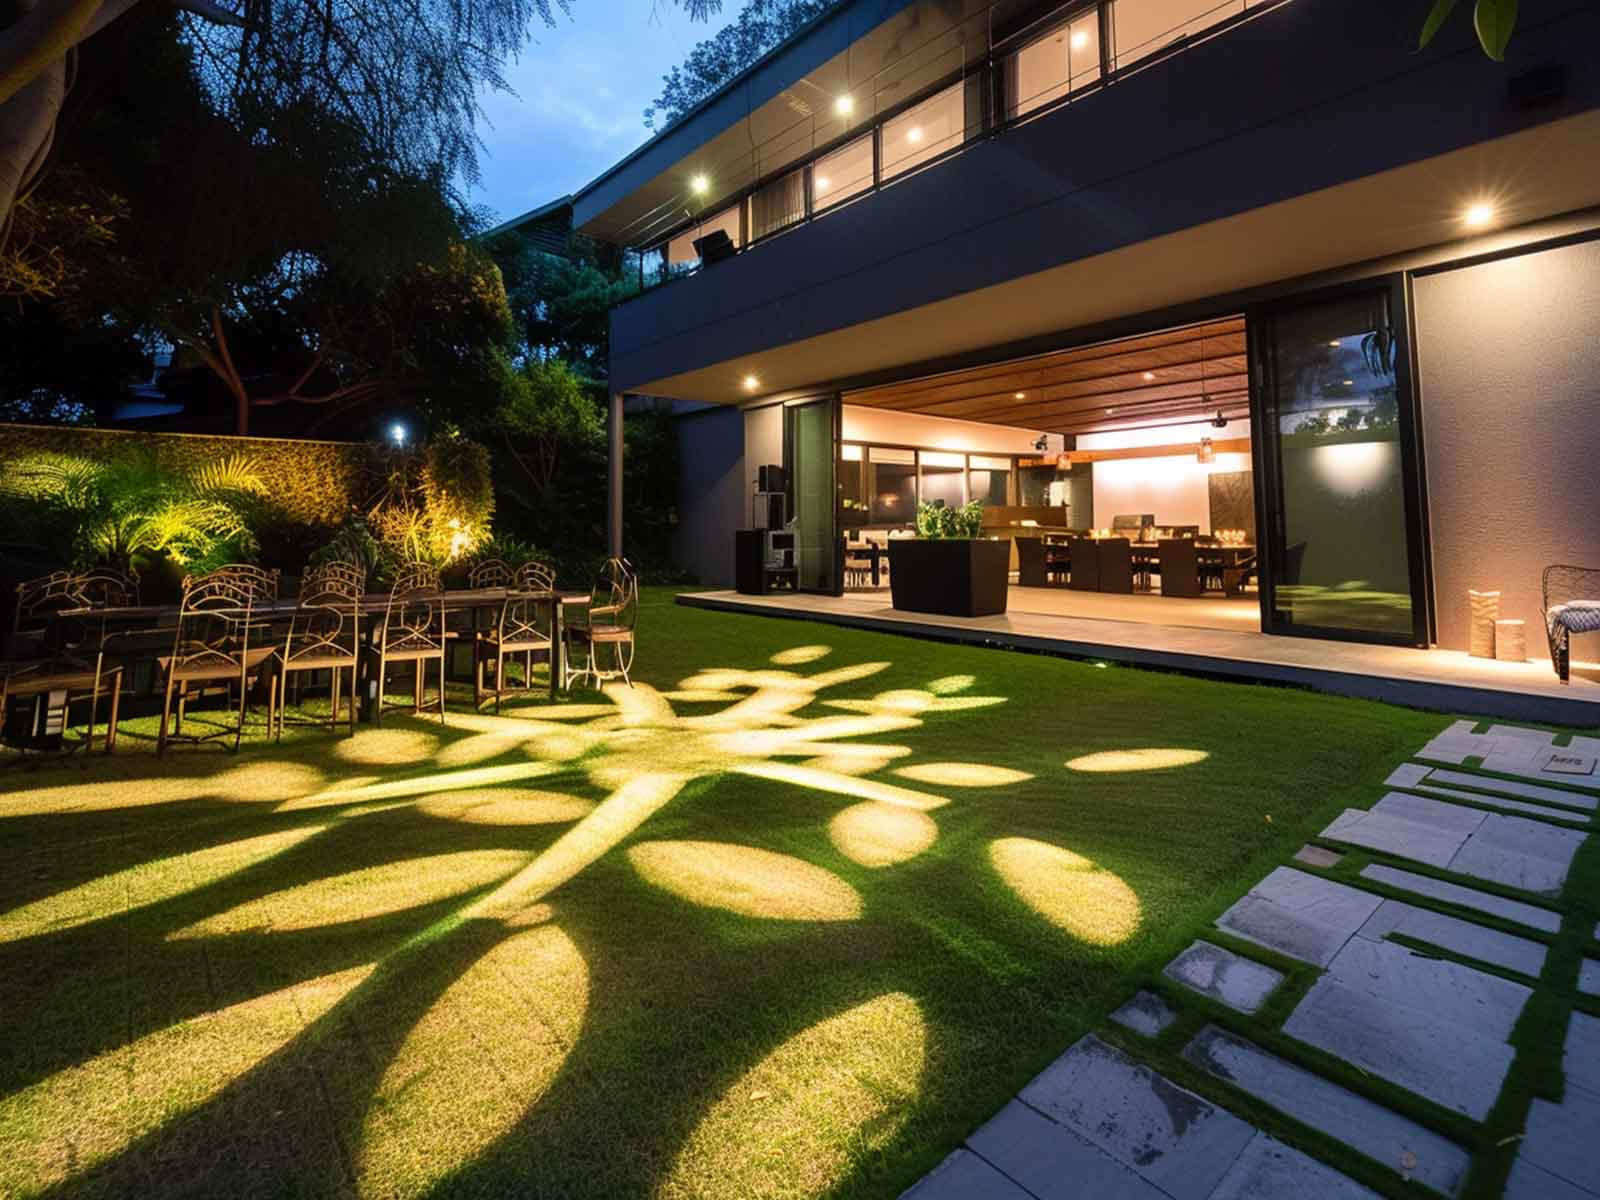 Projection lighting being used to display abstract patterns on a garden lawn